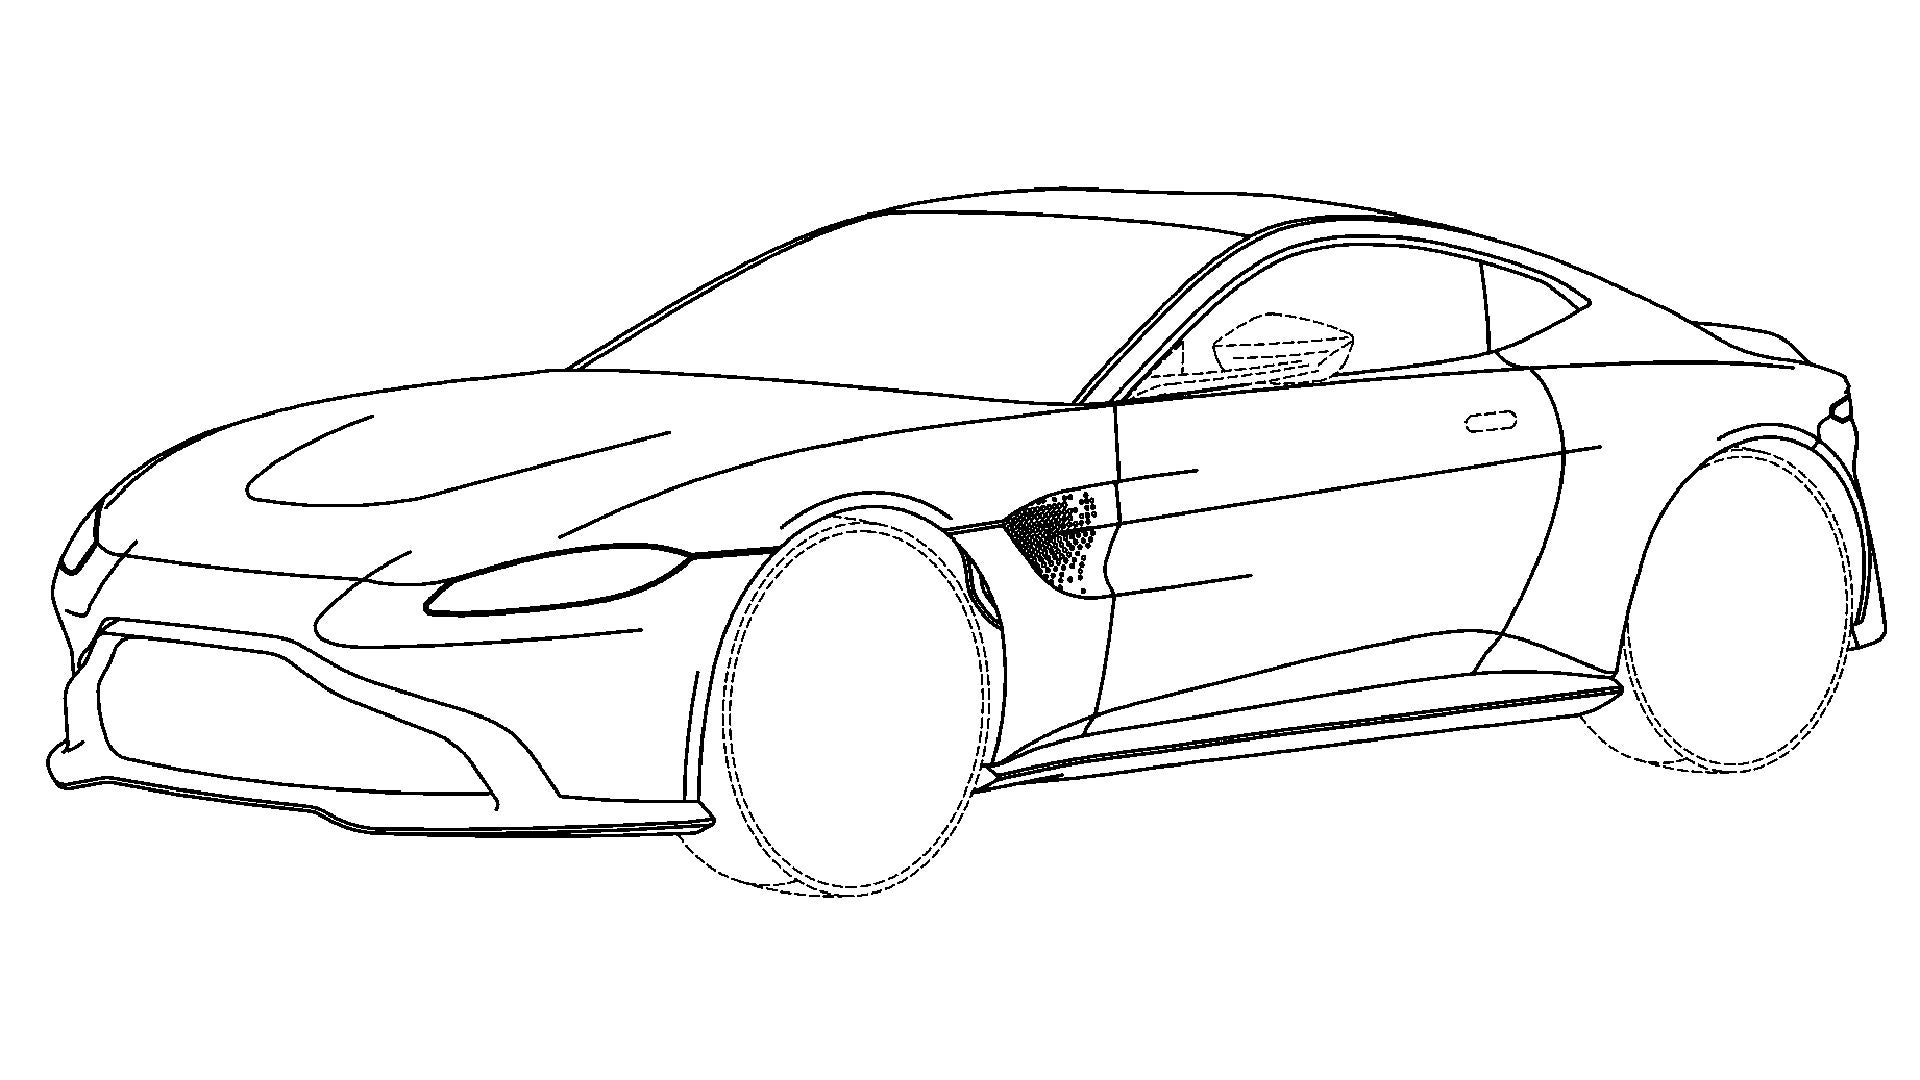 Do These Patent Drawings Show the New 2018 Aston Martin